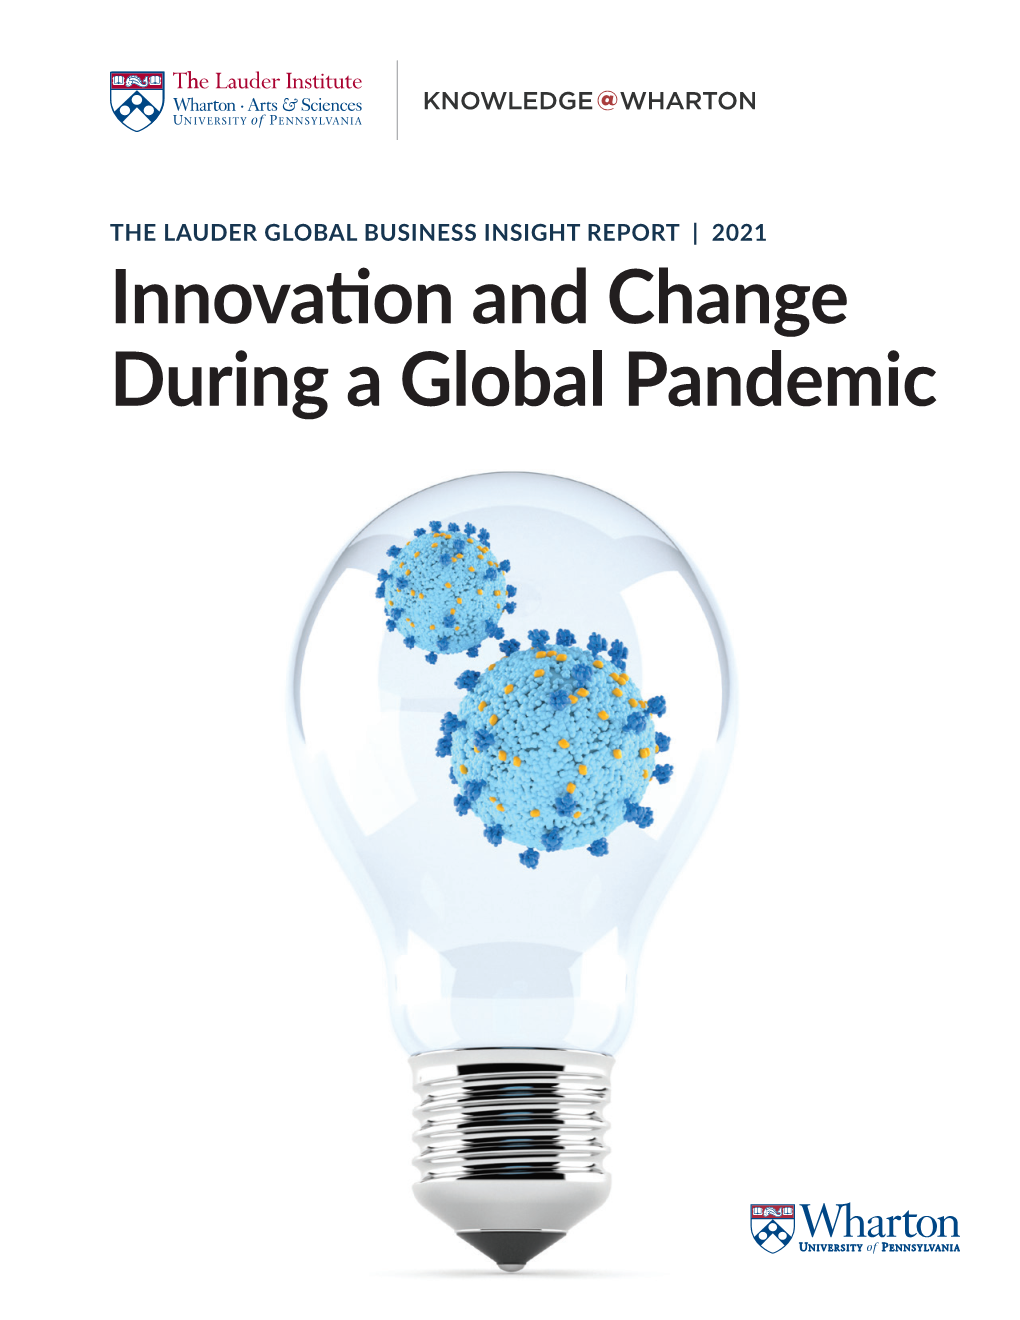 Innovation and Change During a Global Pandemic INTRODUCTION